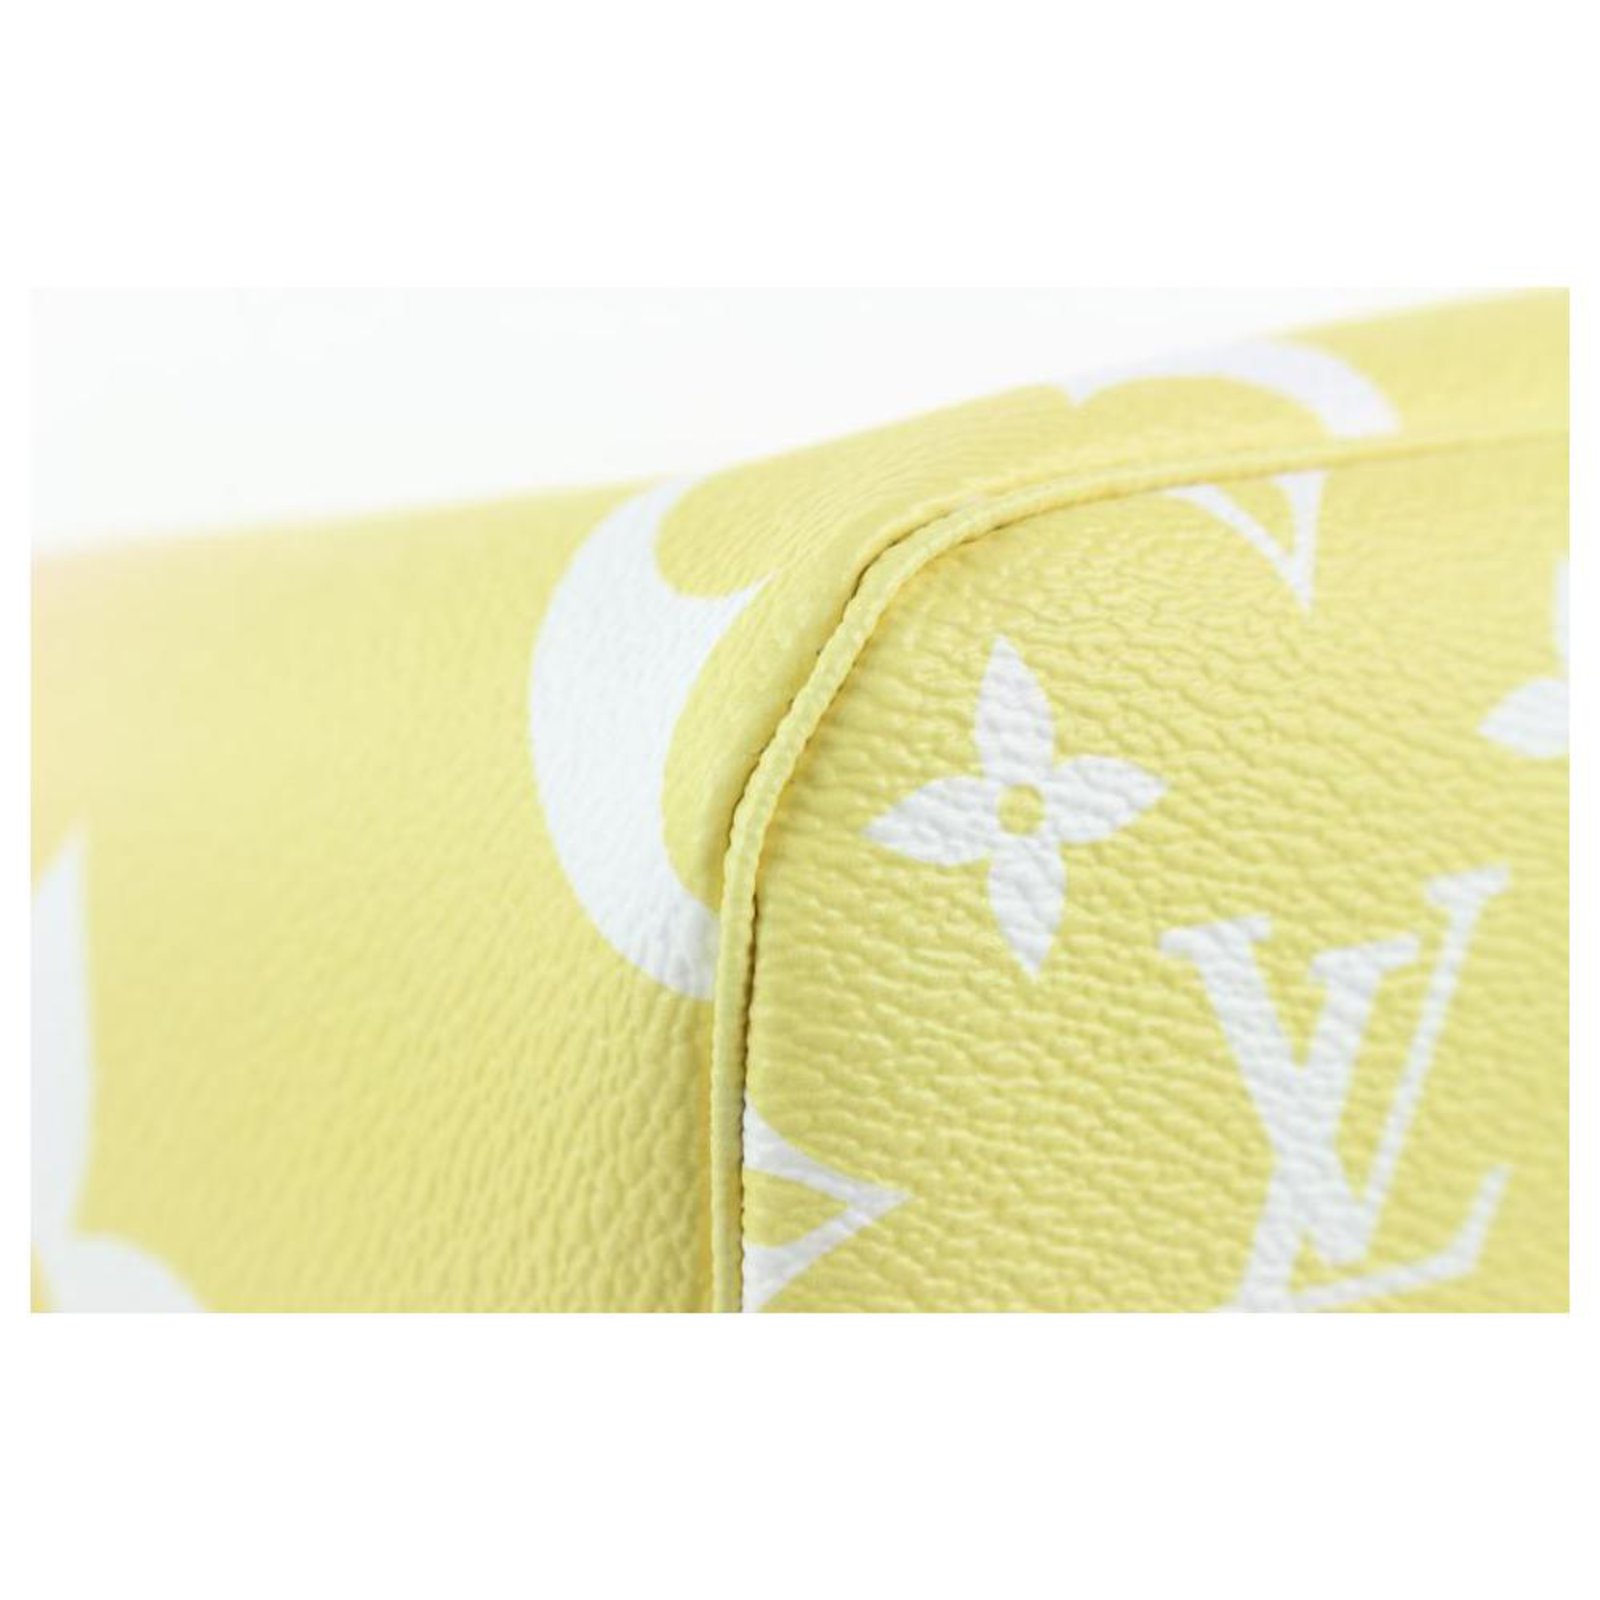 Louis Vuitton Pink x Yellow Monogram By the Pool Neverfull MM Tote